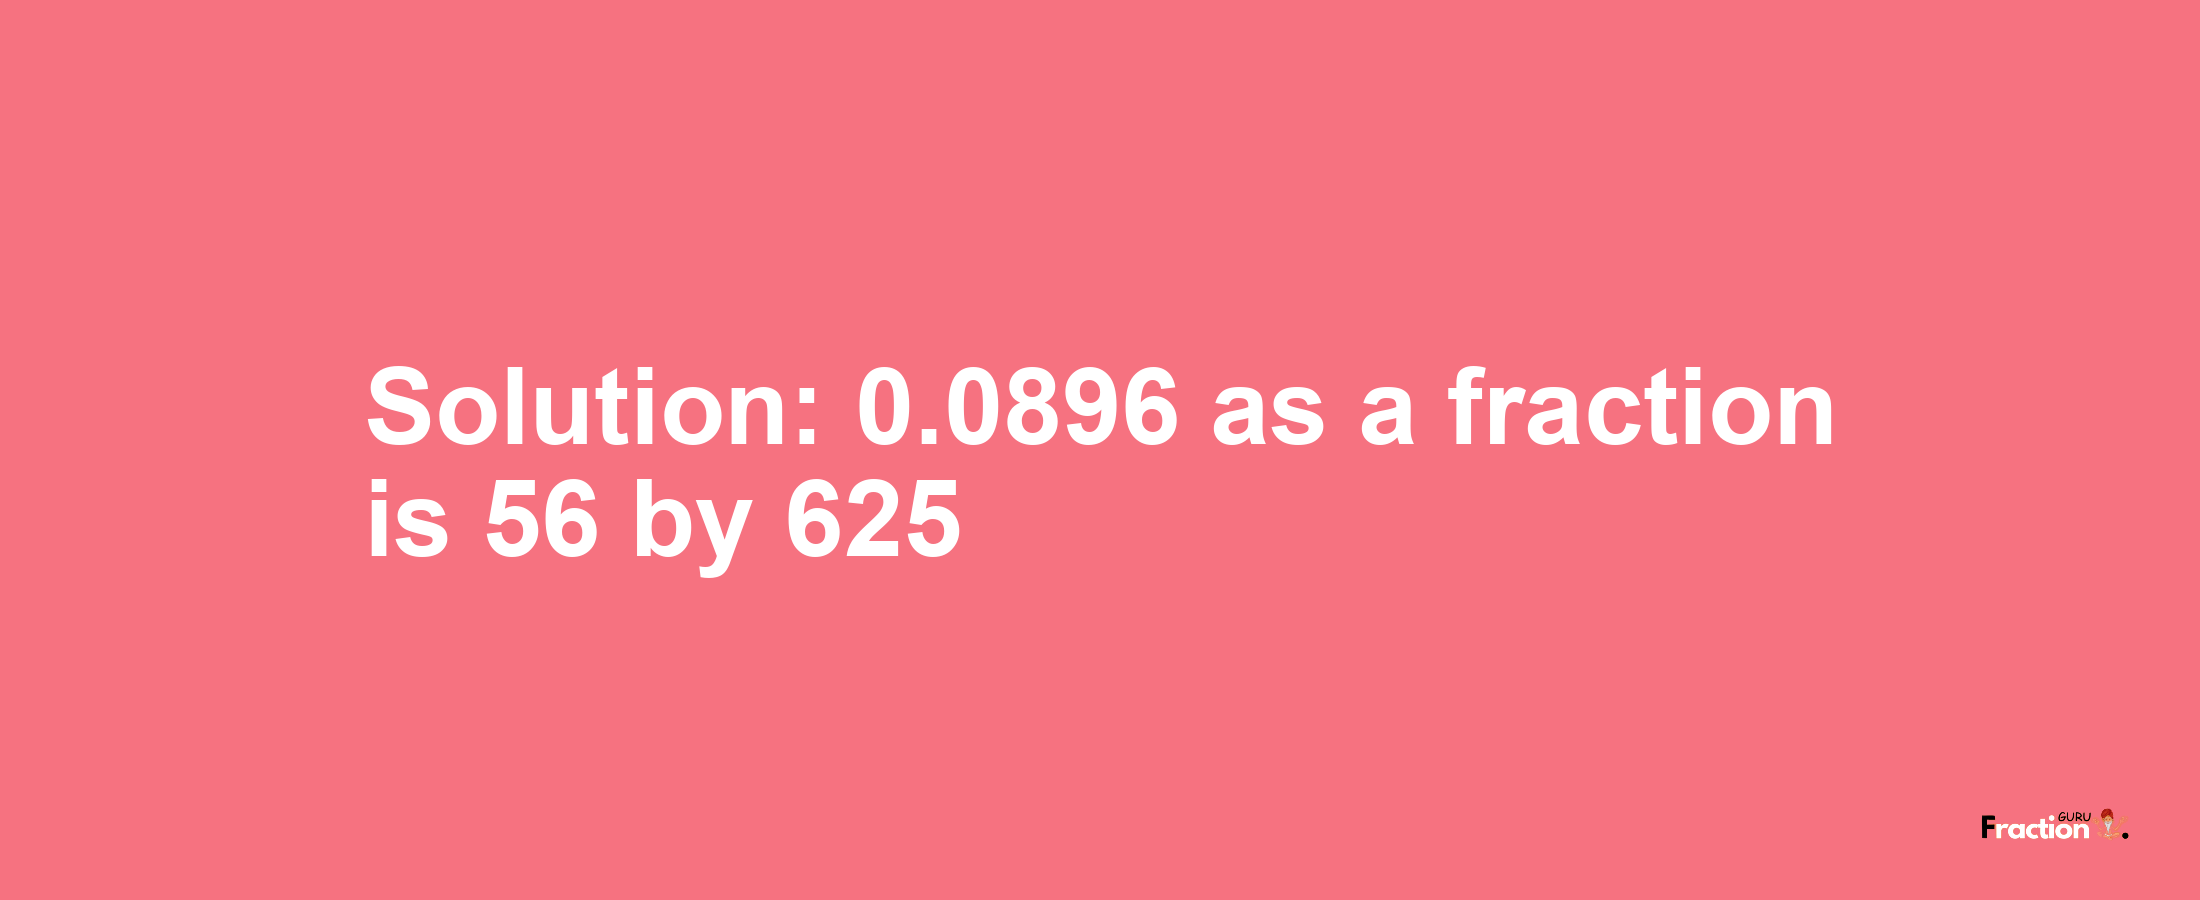 Solution:0.0896 as a fraction is 56/625